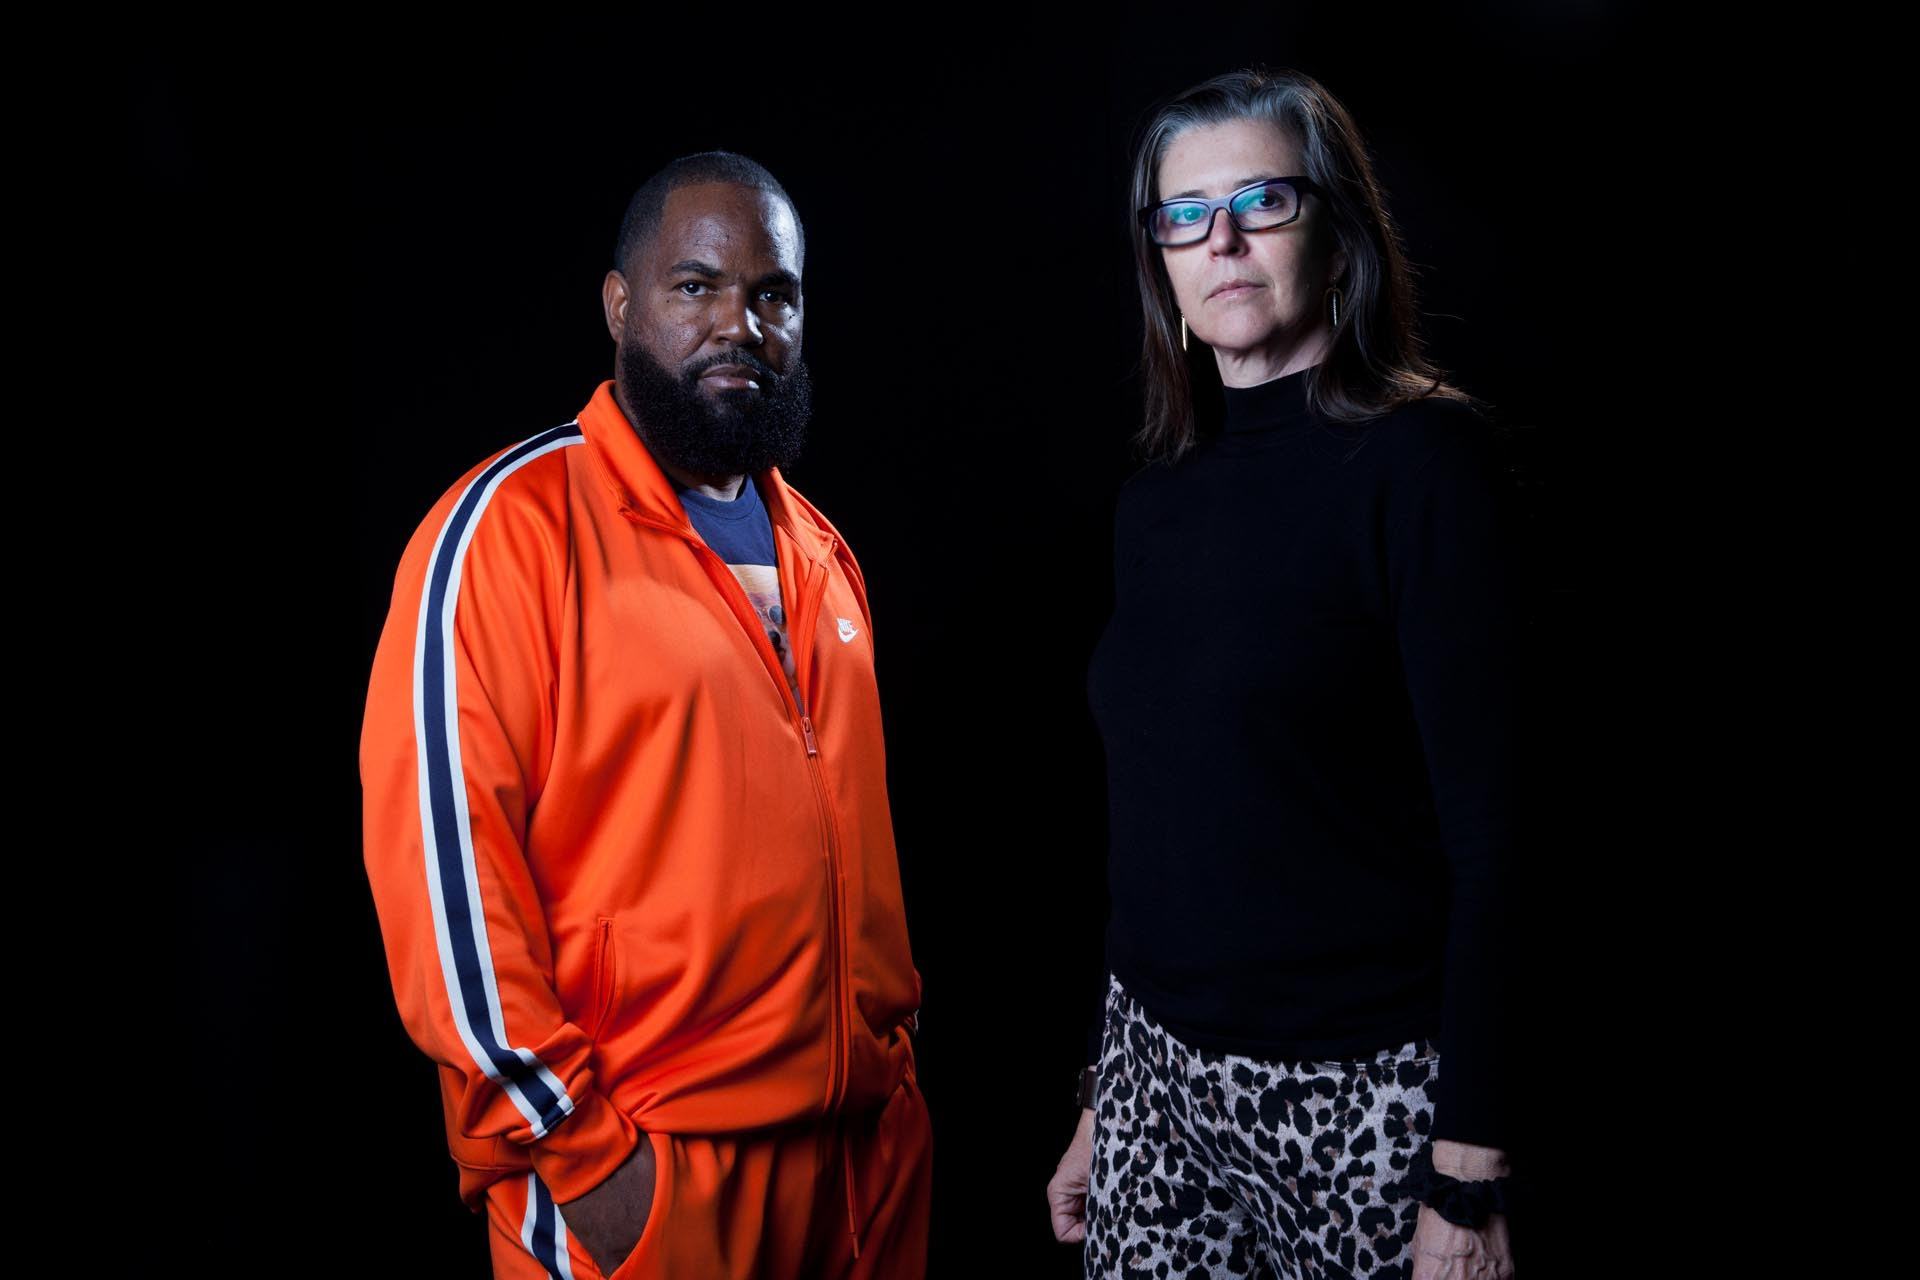 Black background with Black man wearing orange track suit and white woman wearing black sweater and glasses